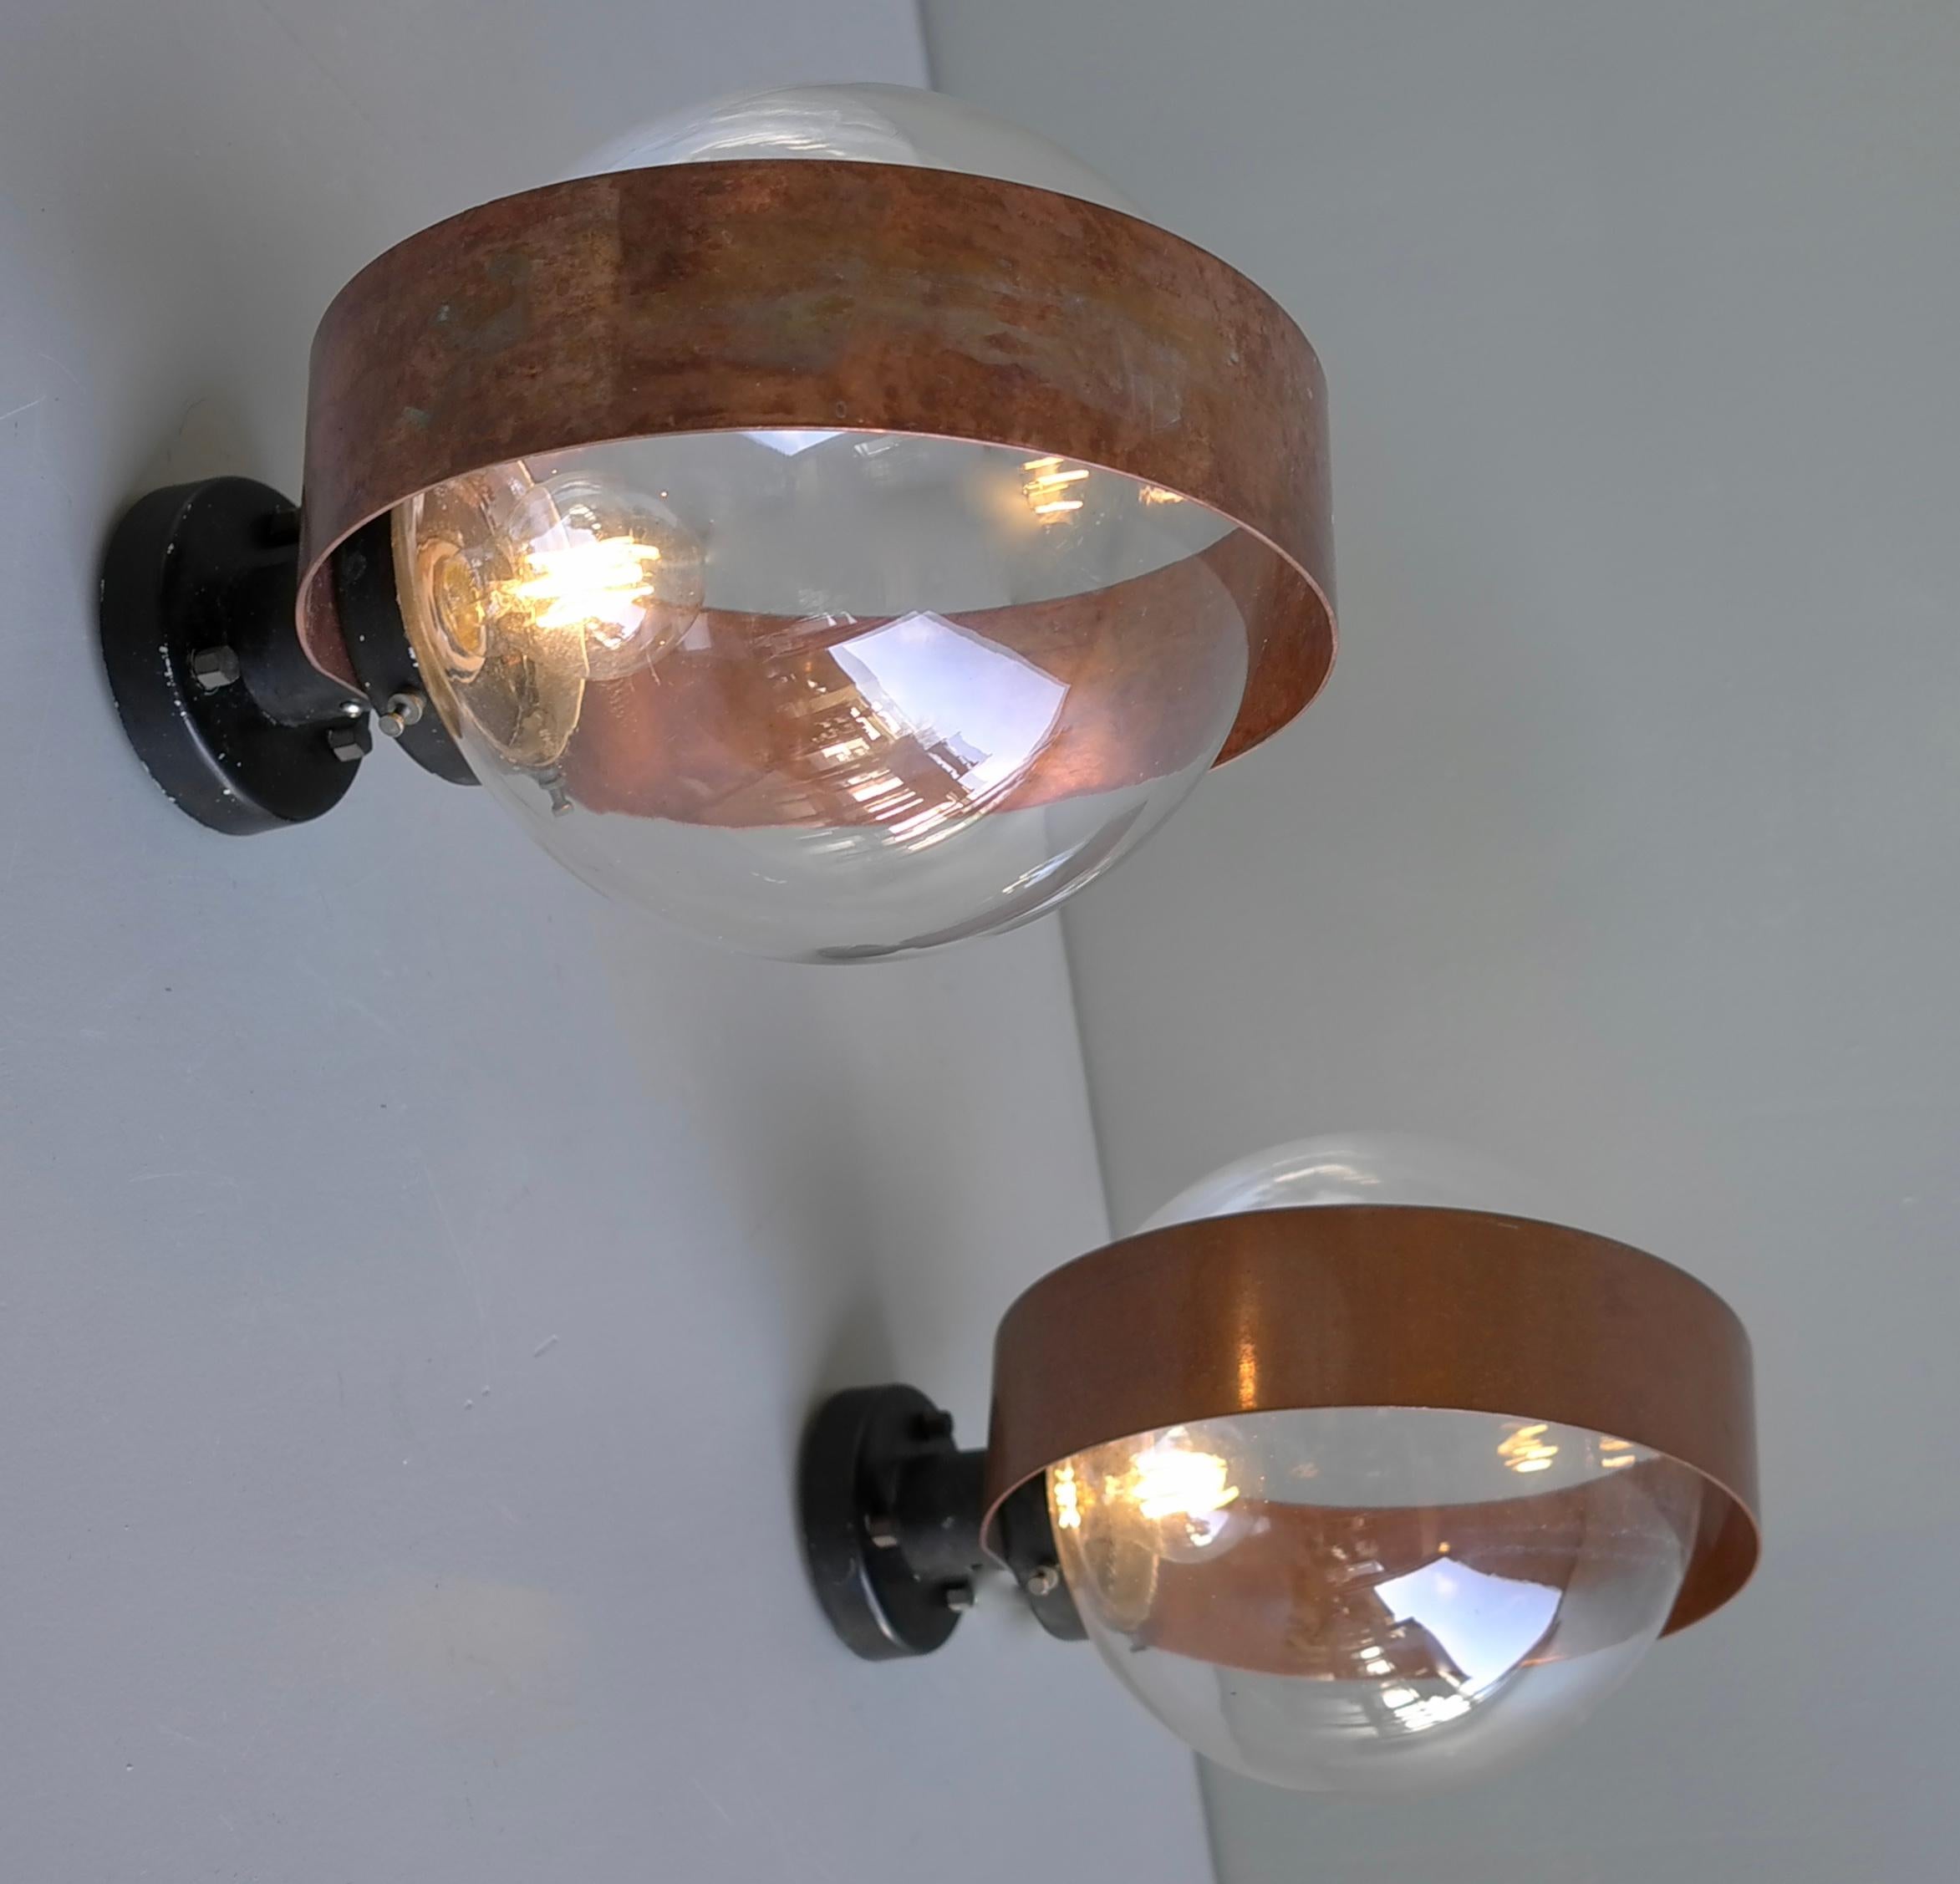 Pair of Scandinavian Glass Ball Wall lamps with Copper Patina Rims, 1960's For Sale 2